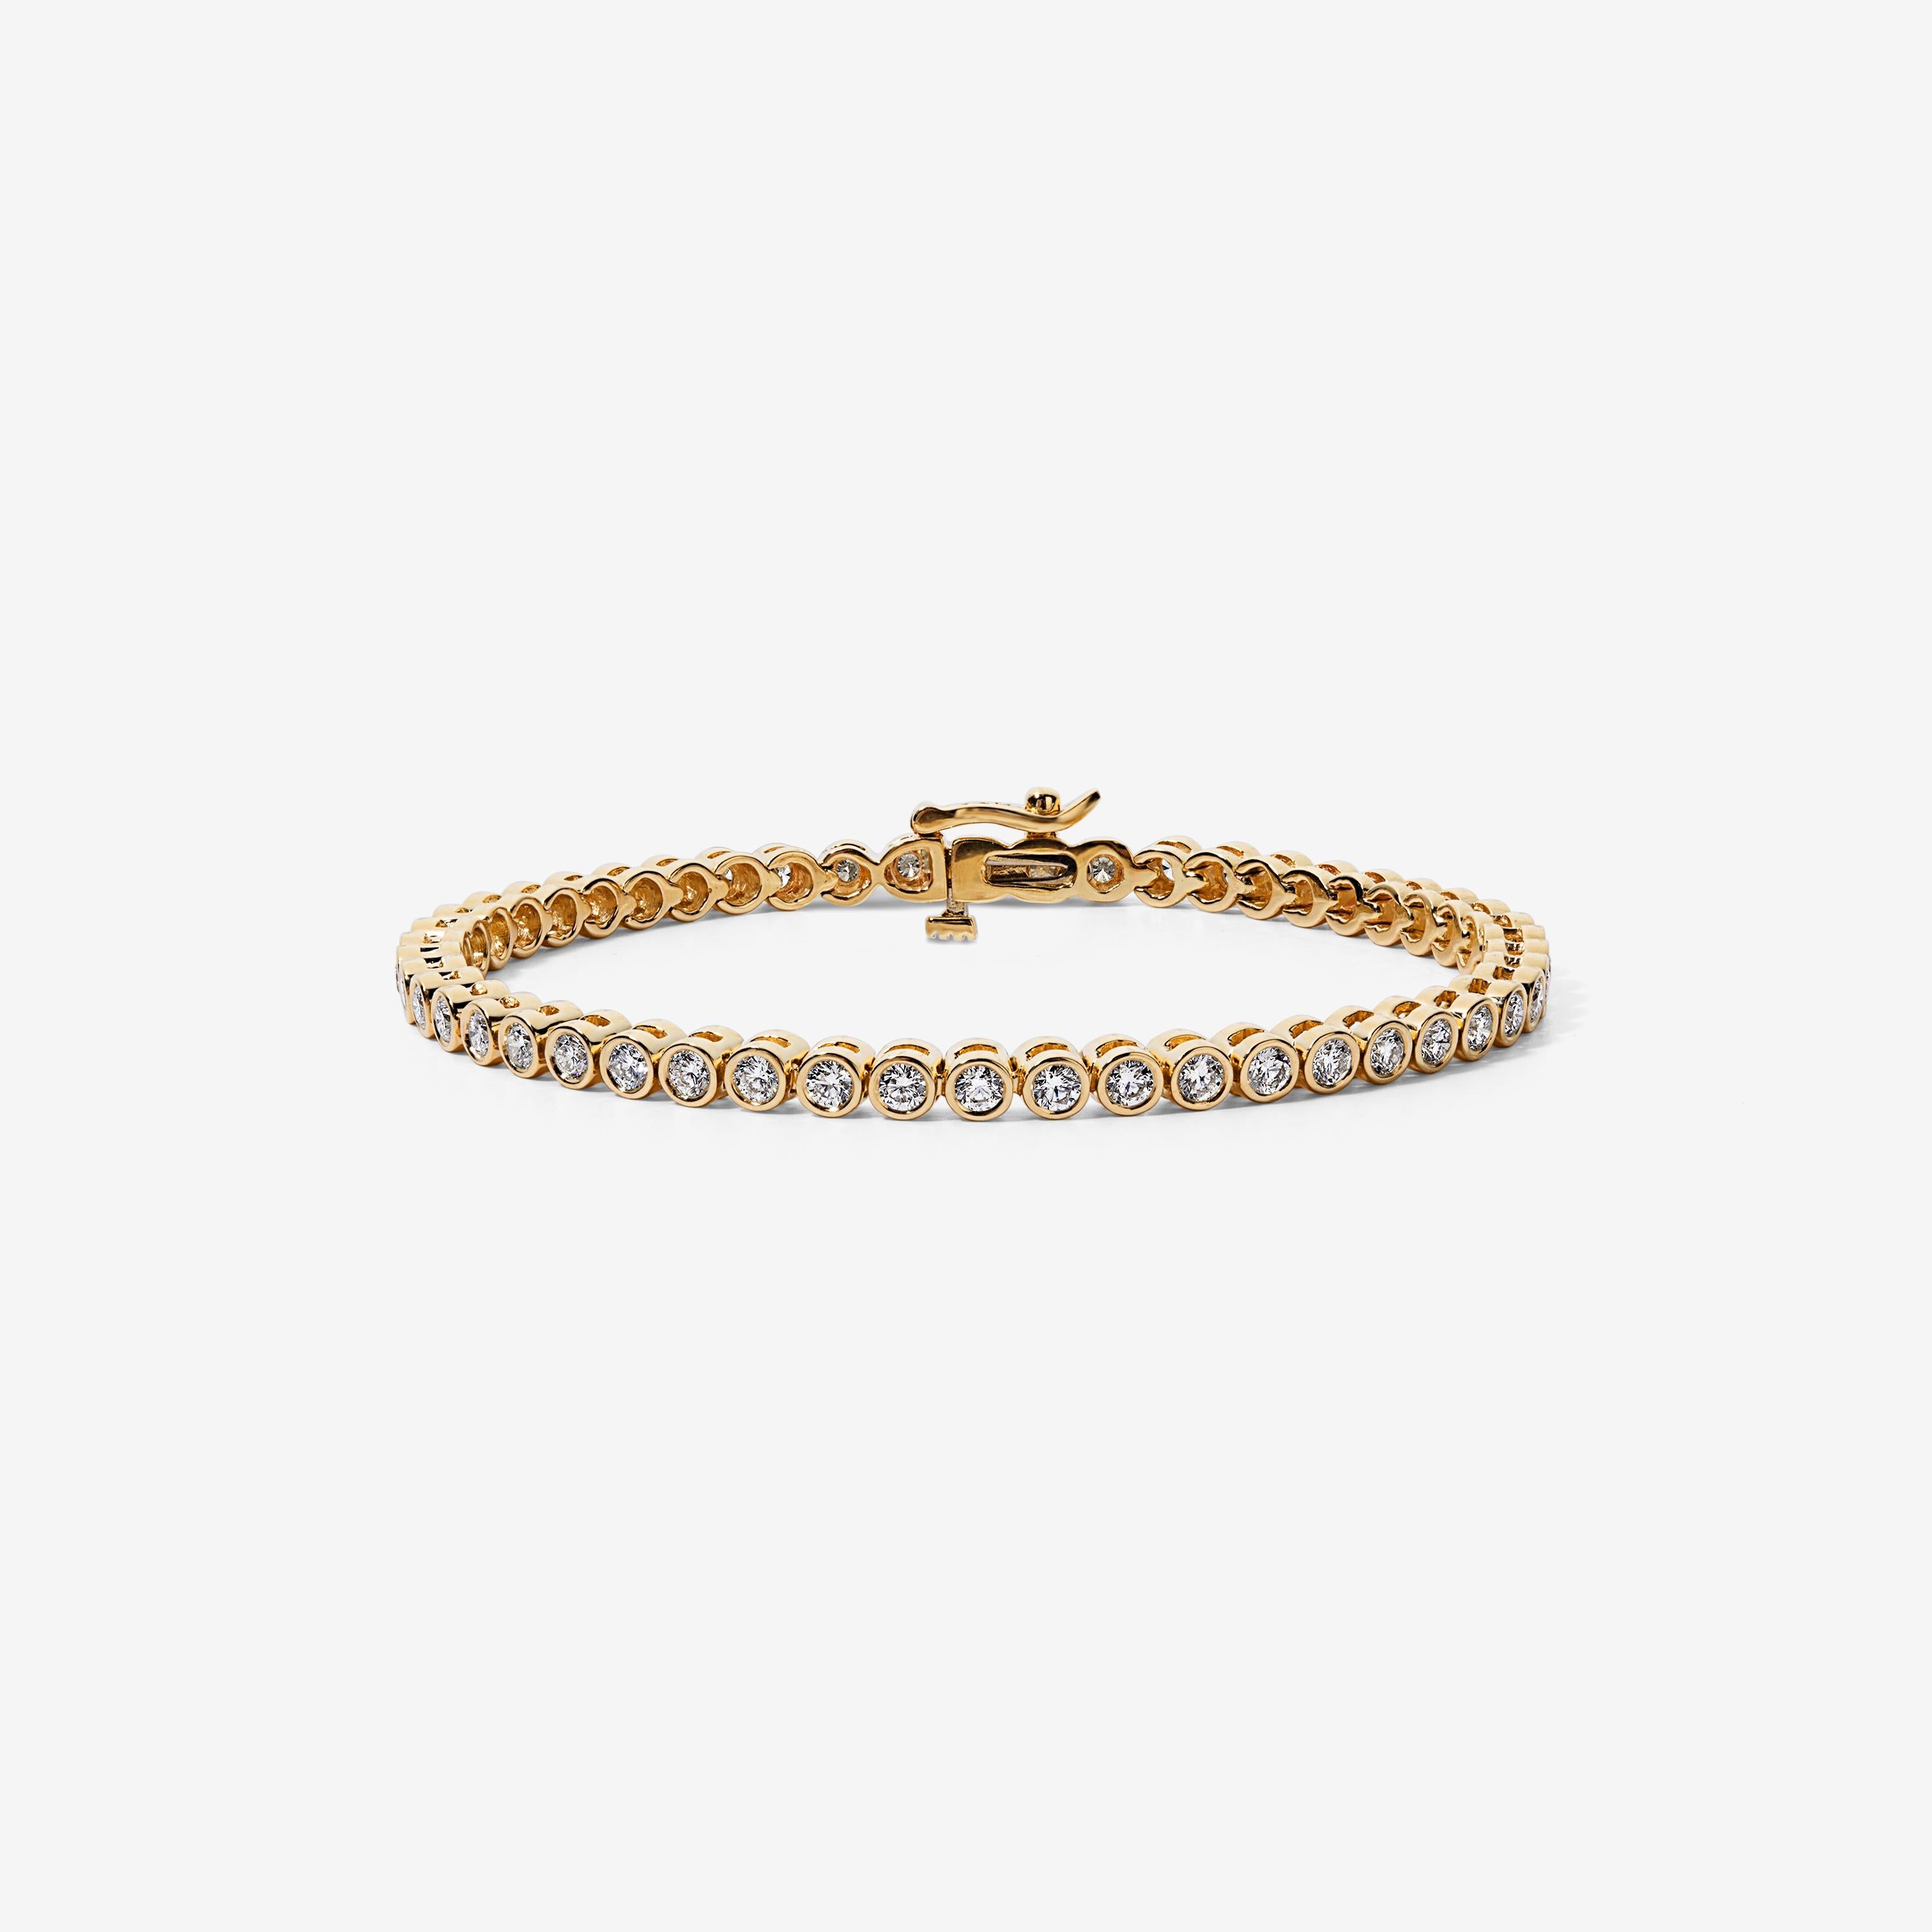 There are tennis bracelets, and then there are tennis bracelets, and this one is a modern take with old-world craftsmanship.

Diamonds are prisms; they are only as beautiful as the platform they sit on. We spend hours cleaning the galleries